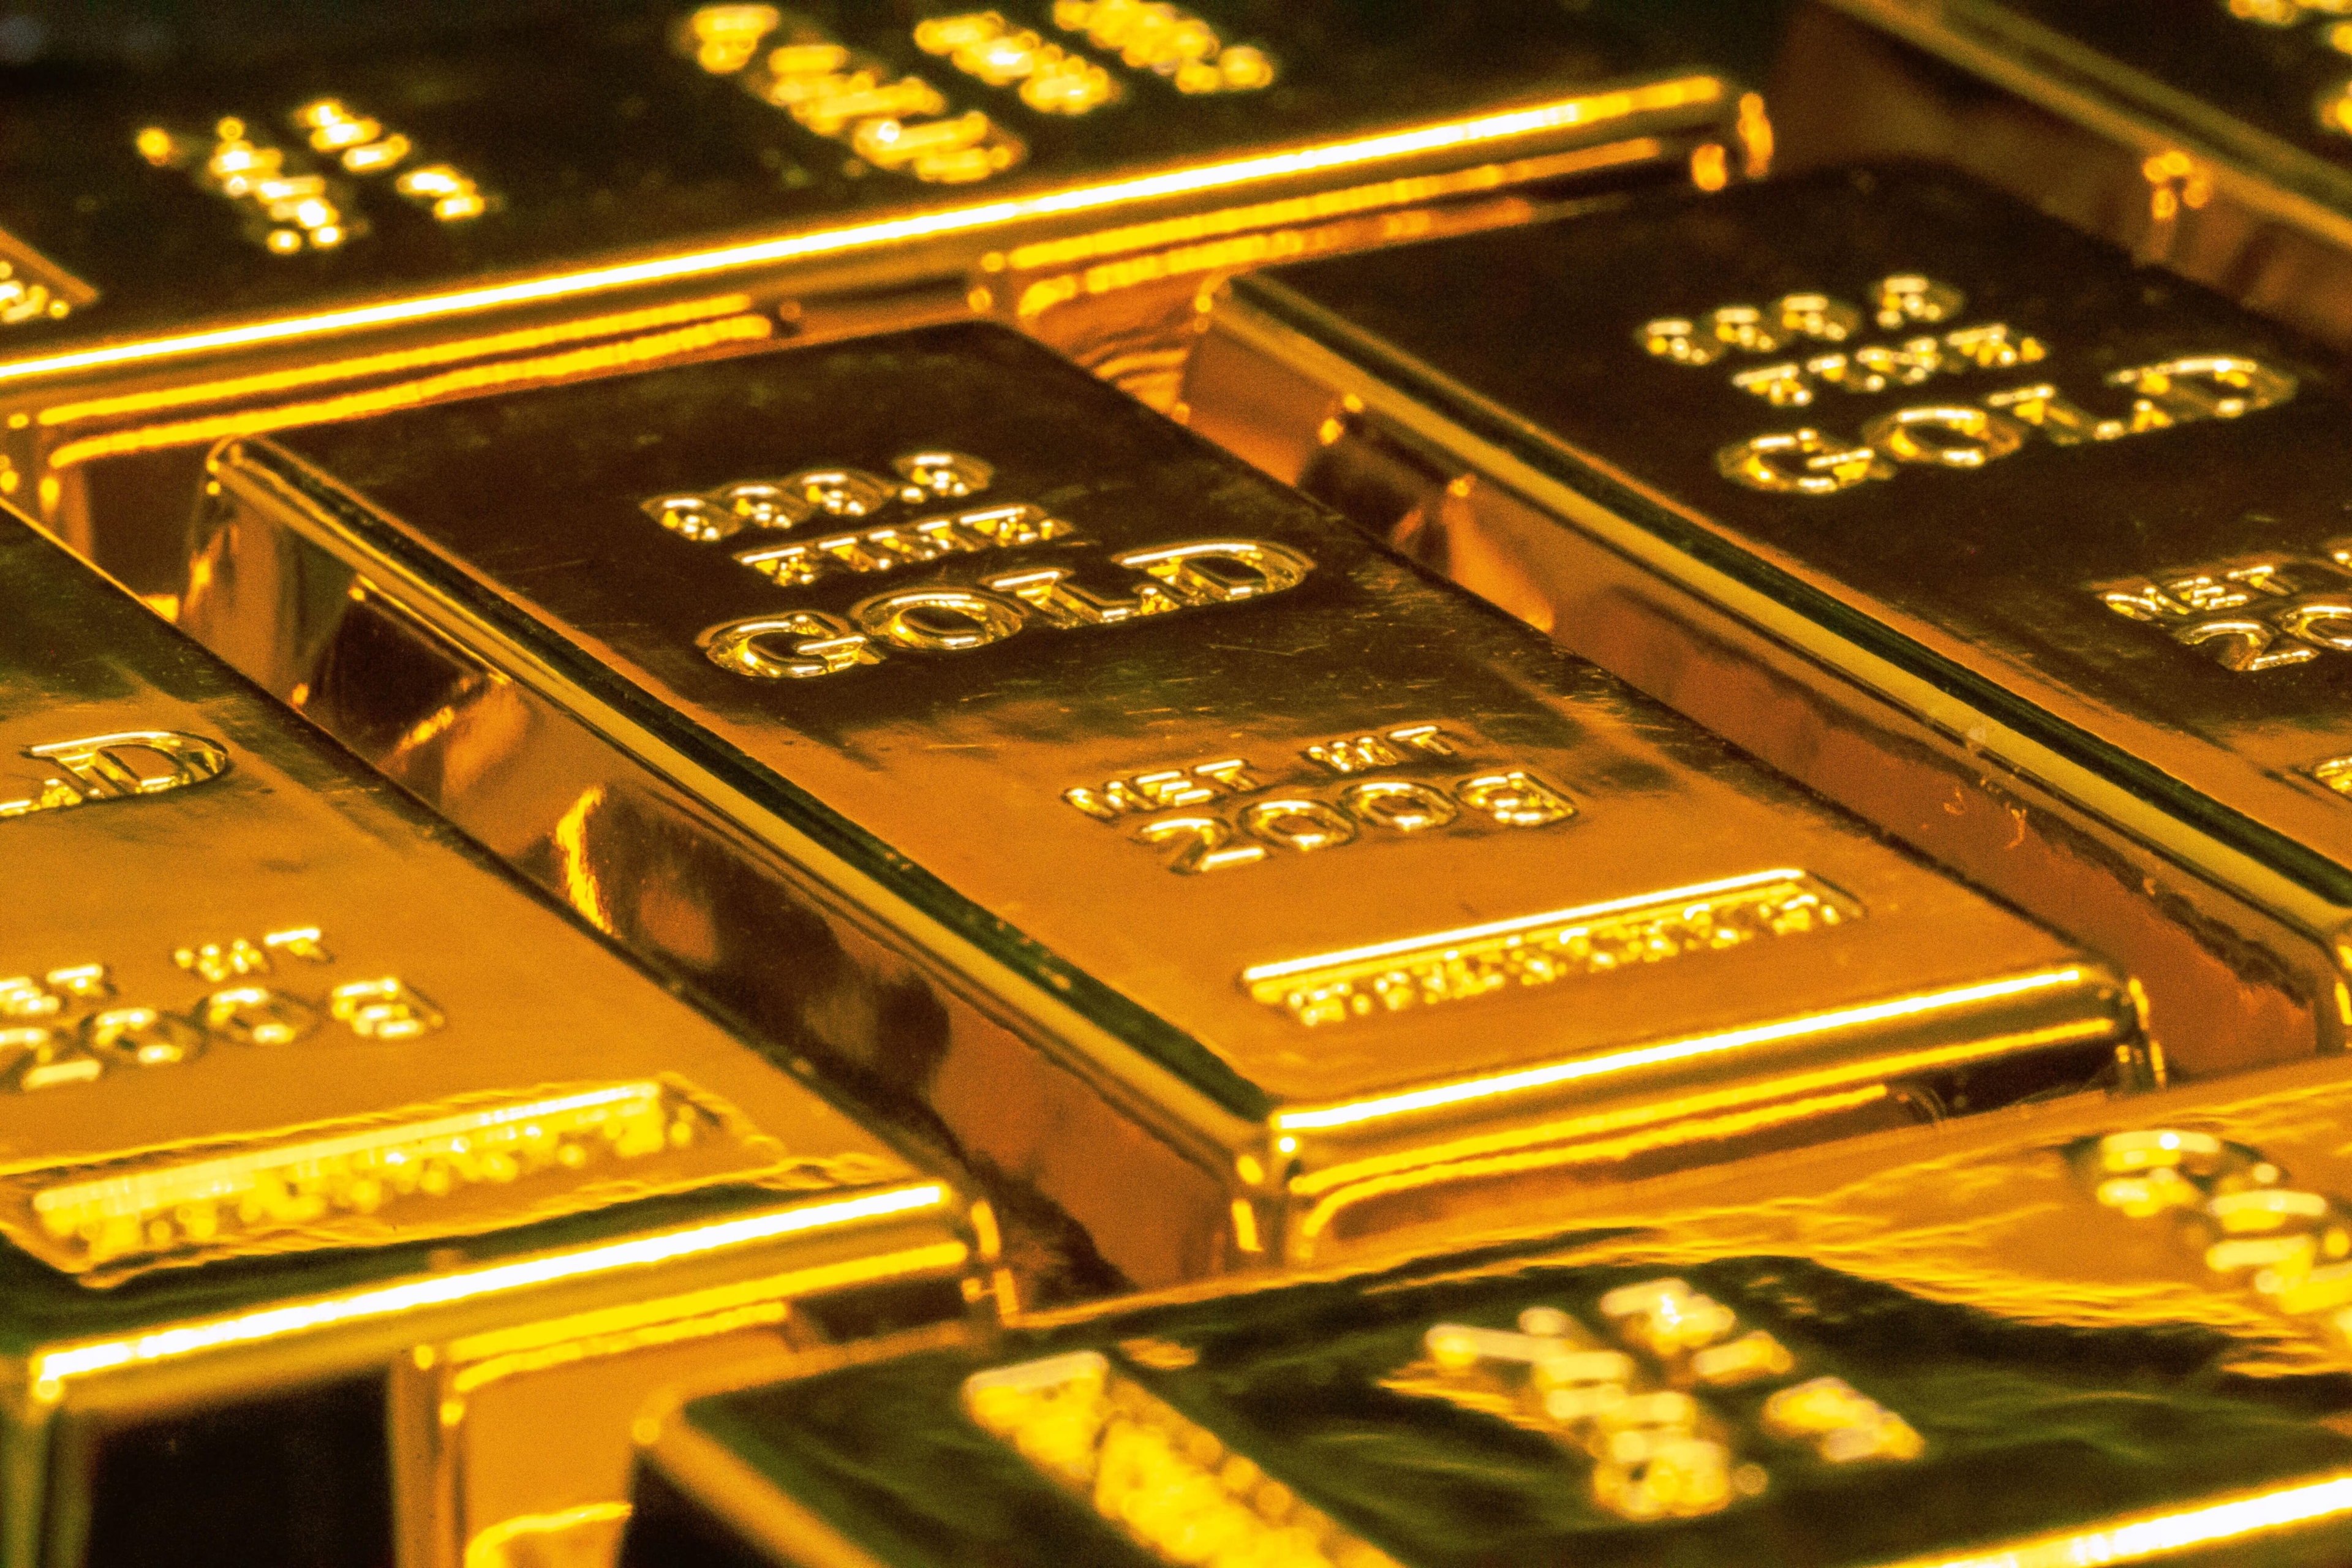 Spot gold was up 0.6 percent to $1,960.40 an ounce as investors turned to safe-haven yellow metal ahead of inflation data.